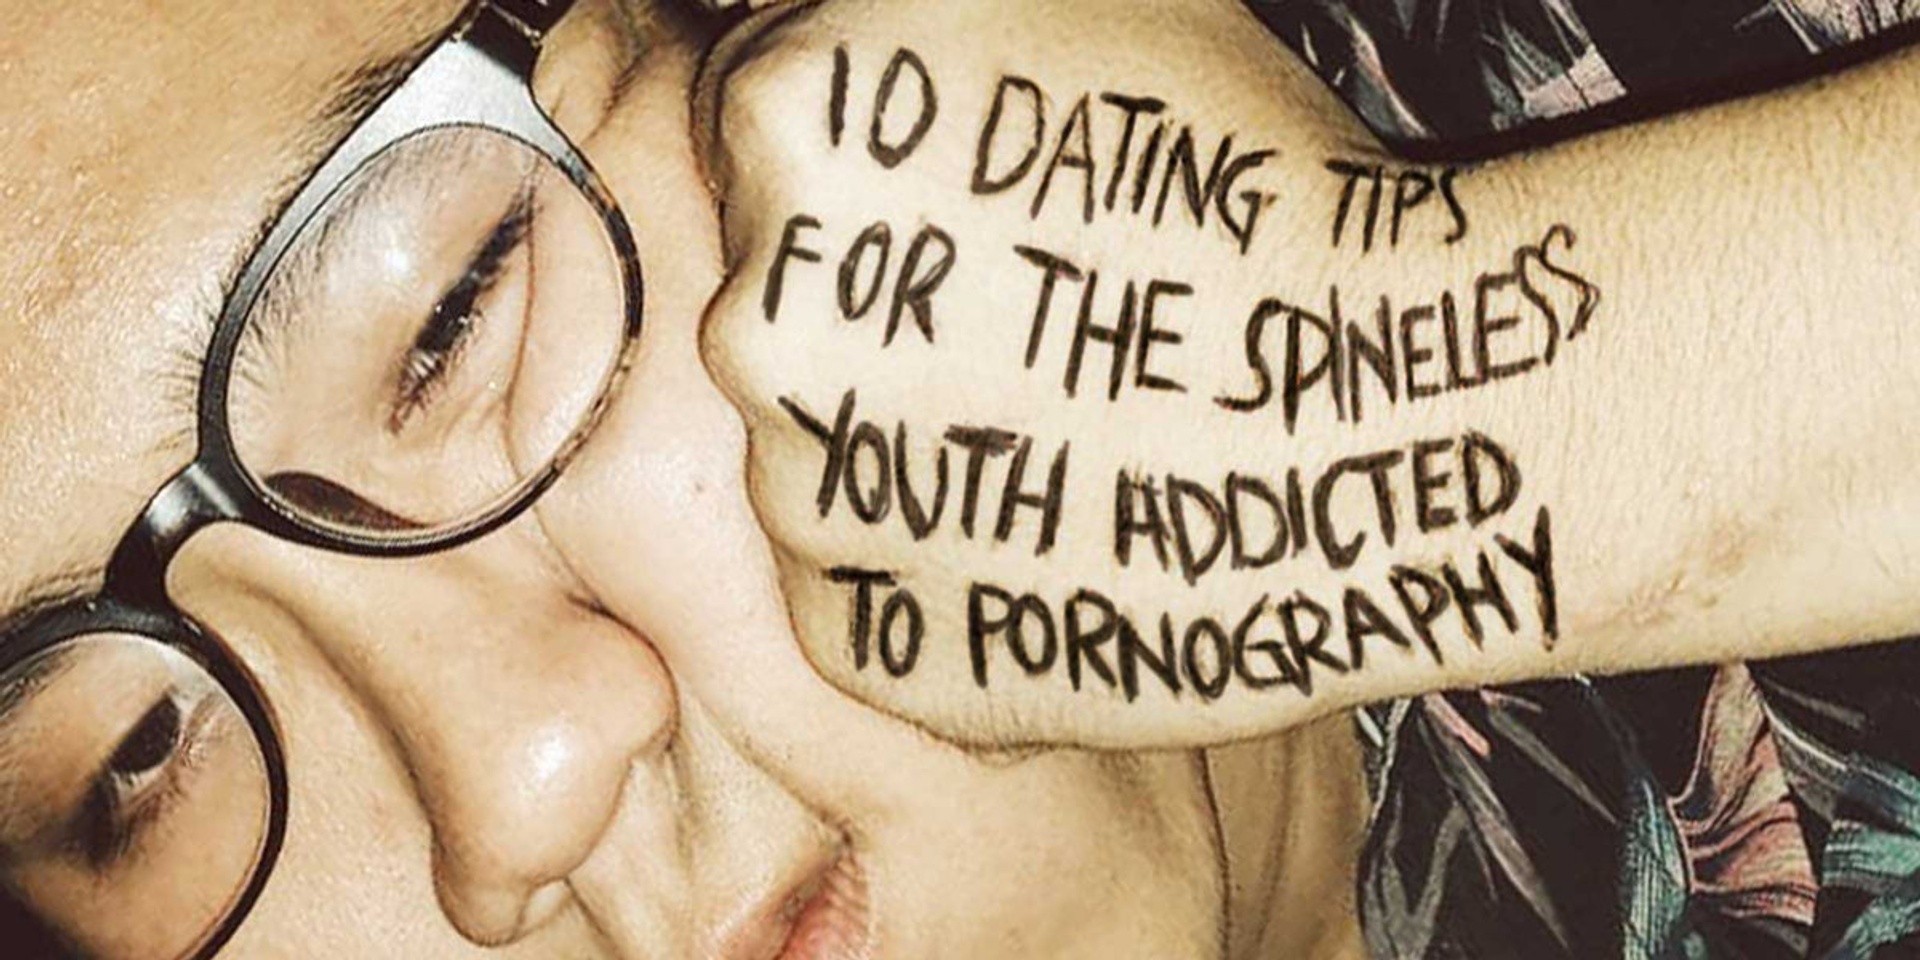 LISTEN: Xingfoo&roy's debut album, 10 Dating Tips for the Spineless Youth Addicted to Pornography